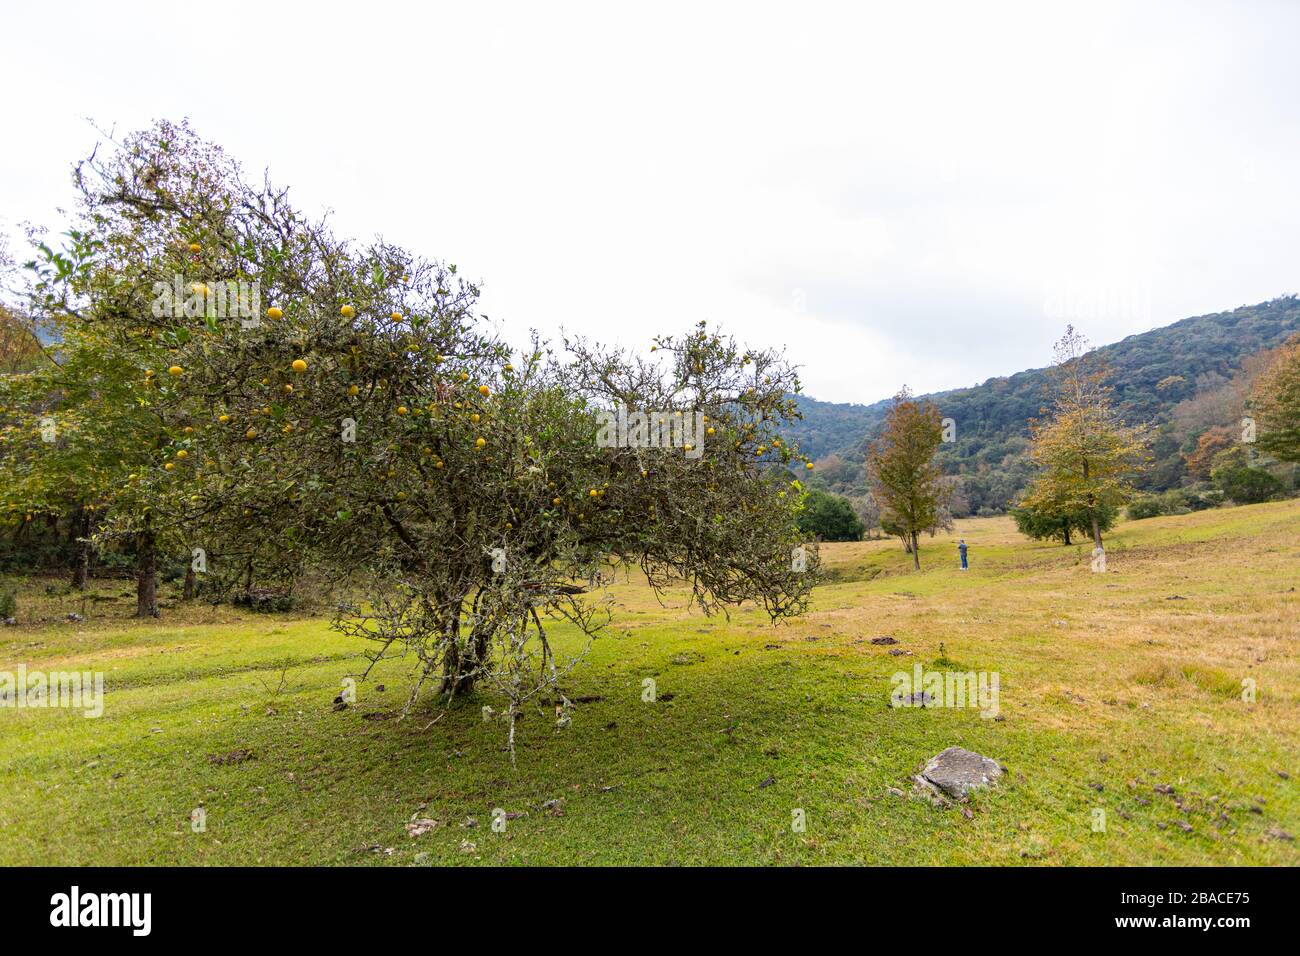 Orange tree in a valley in the mountains at el Cielo, Tamaulipas, Mexico Stock Photo